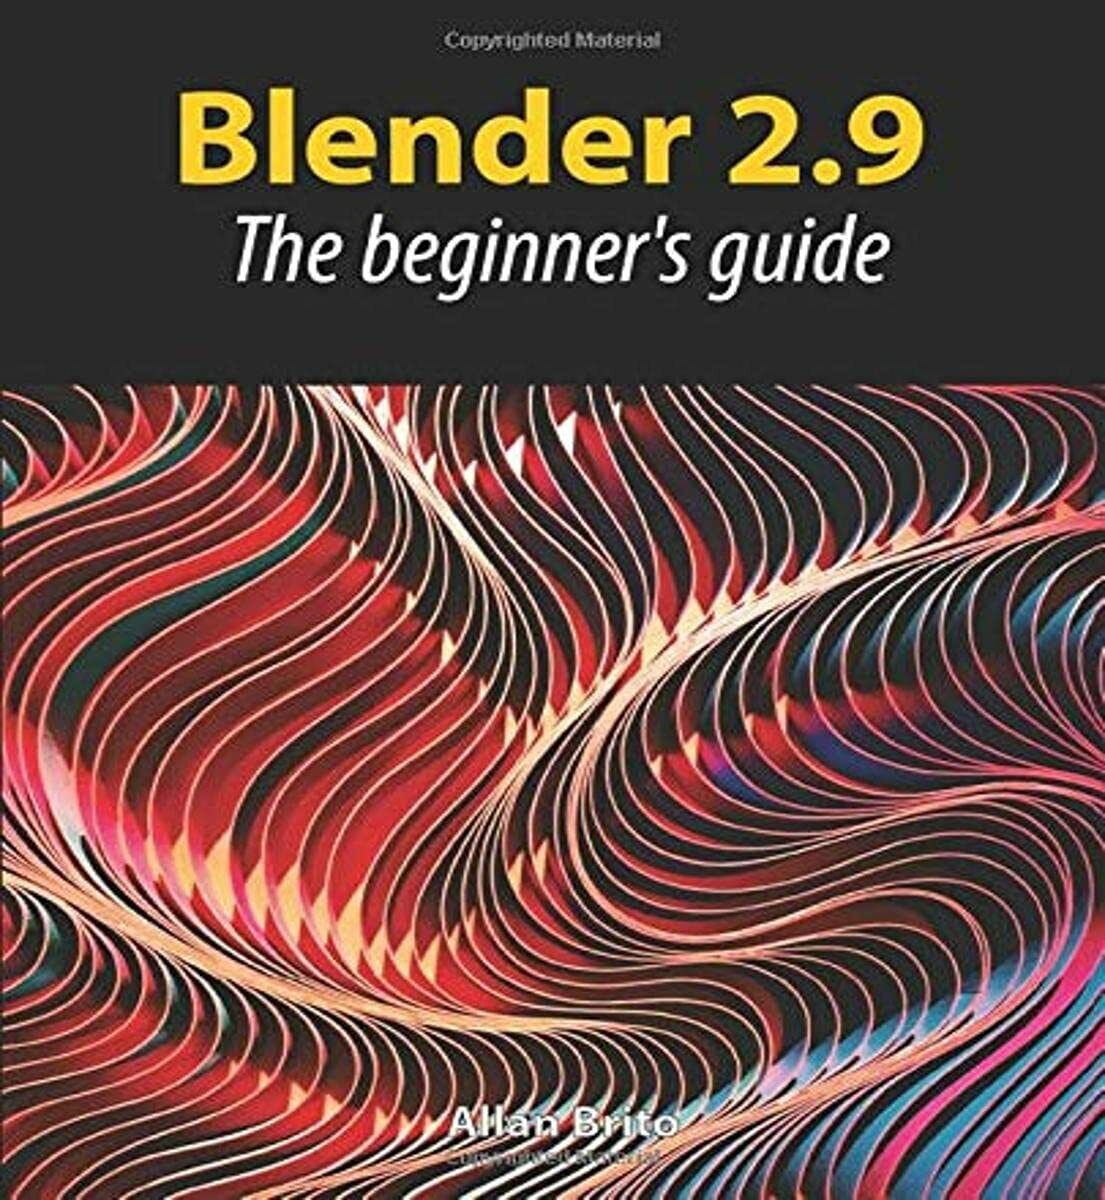 Blender 2.9 The Beginner?s Guide di Allan Brito,  2020,  Indipendently Published libro usato